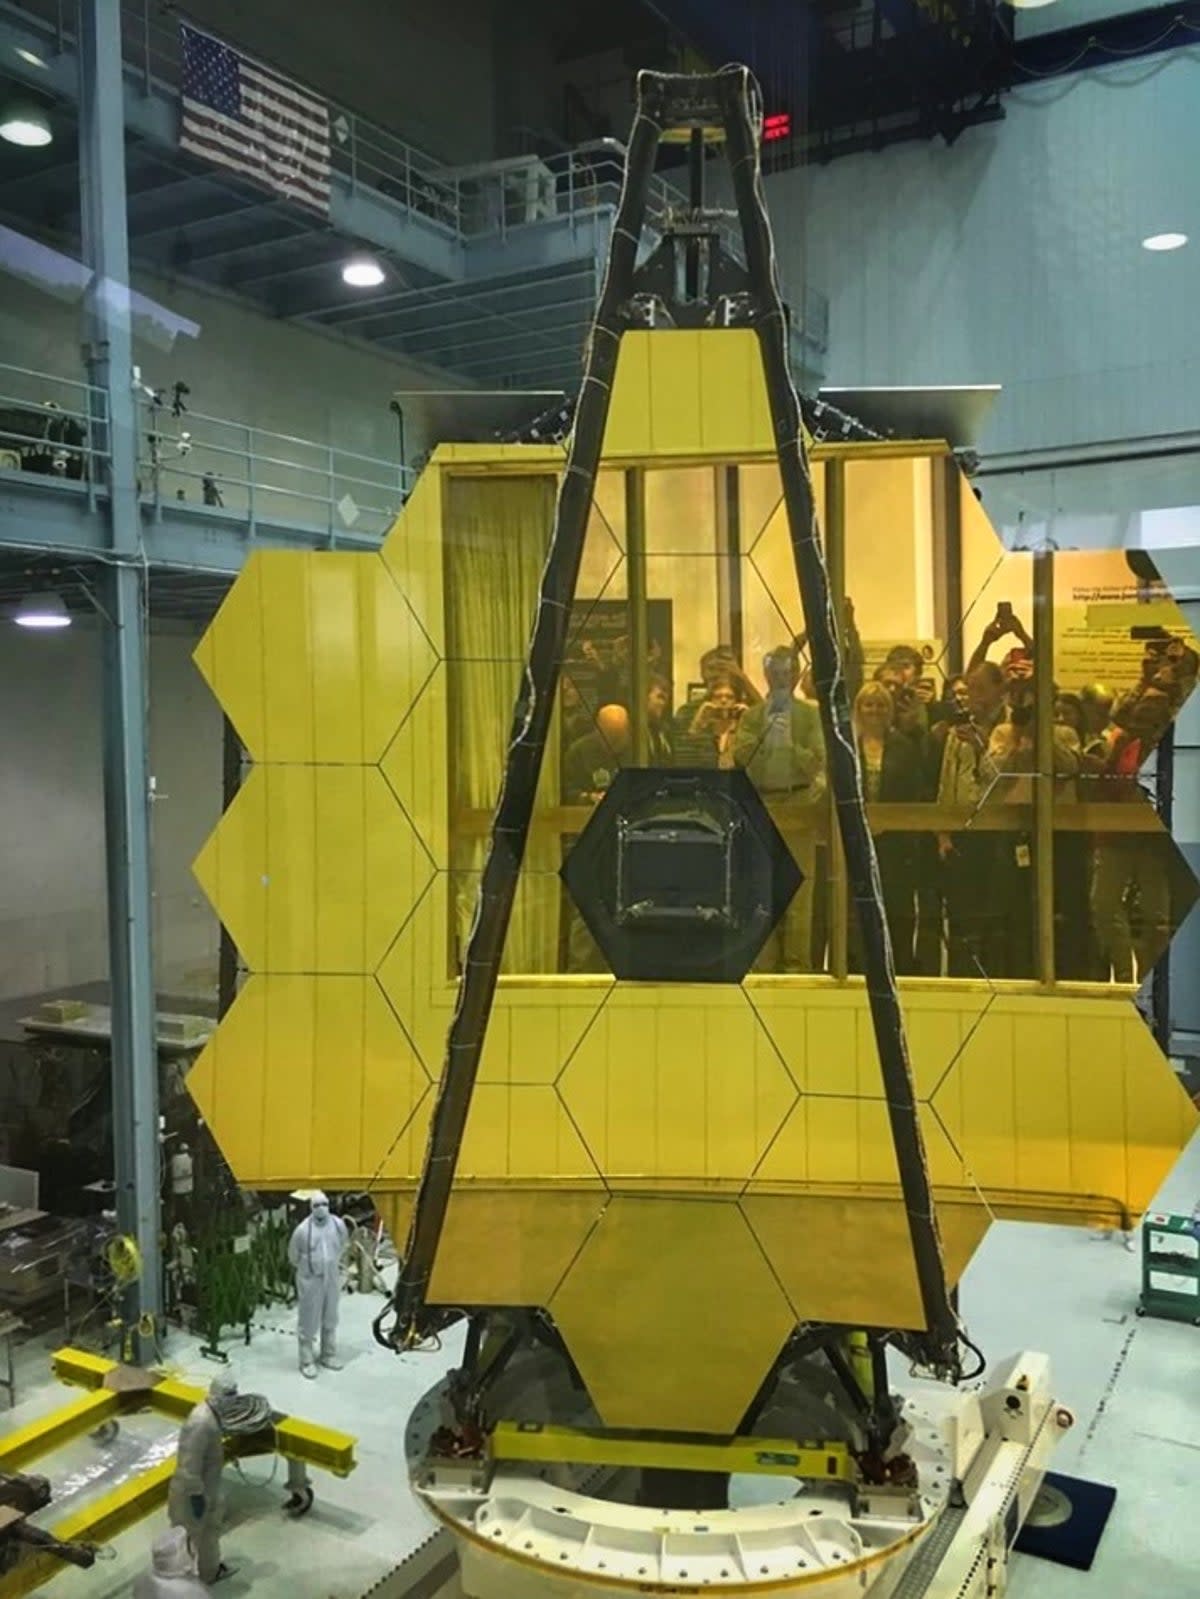 Visitors view the primary mirror of the James Webb Space Telescope in 2017 in the Nasa Goddard Space Flight Center clean room.  (Nasa)